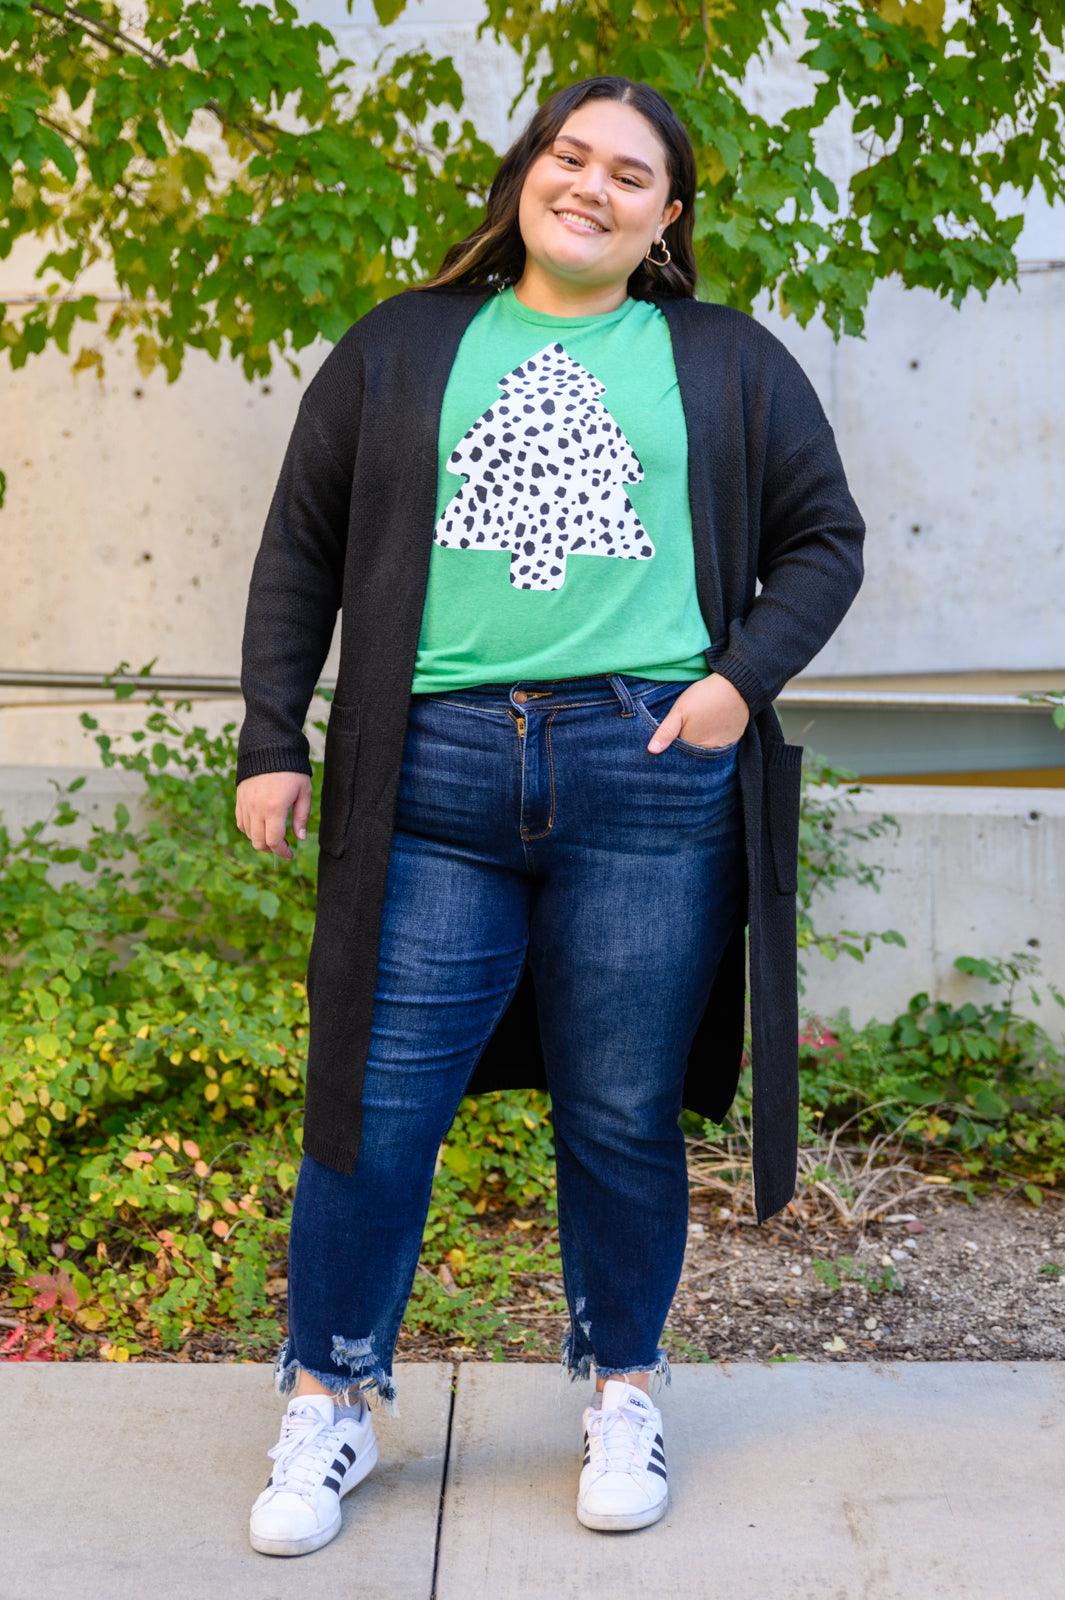 Dalmatian Tree Graphic Tee in Kelly Green-Women’s graphic tee-Hope Boutique &amp; Apparel